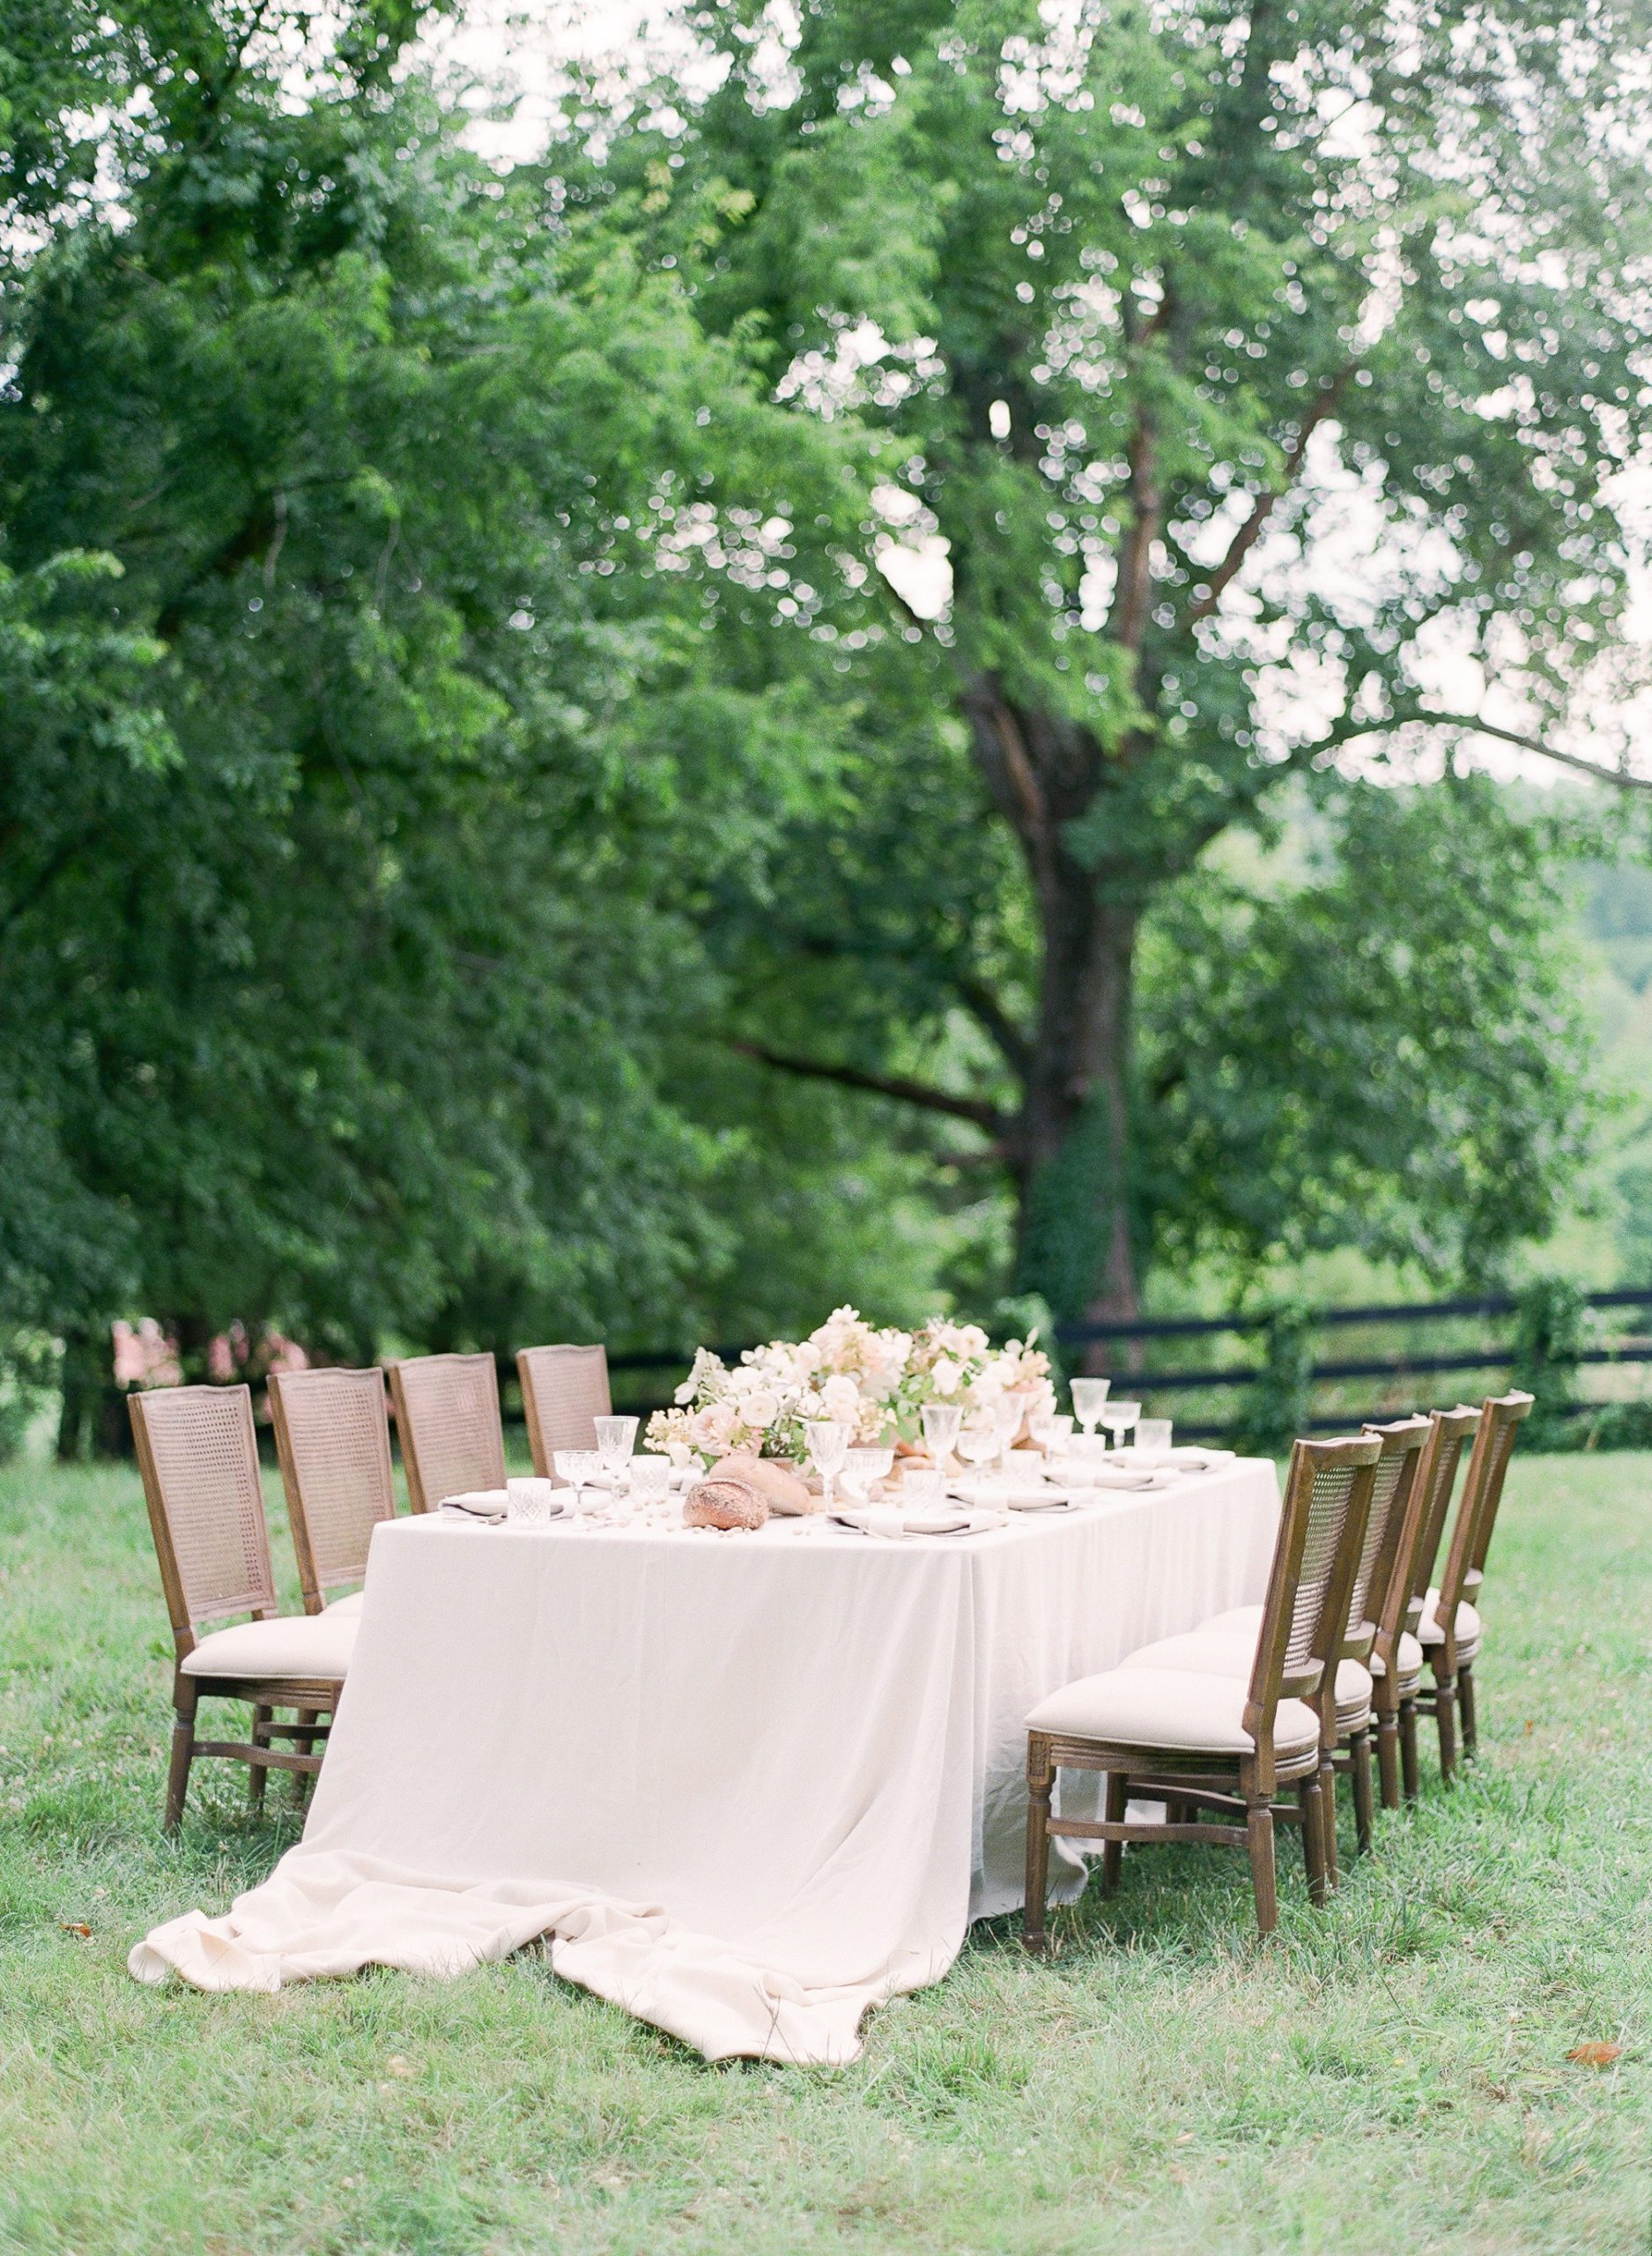 Wedding Reception Table with white linen and flowers photo